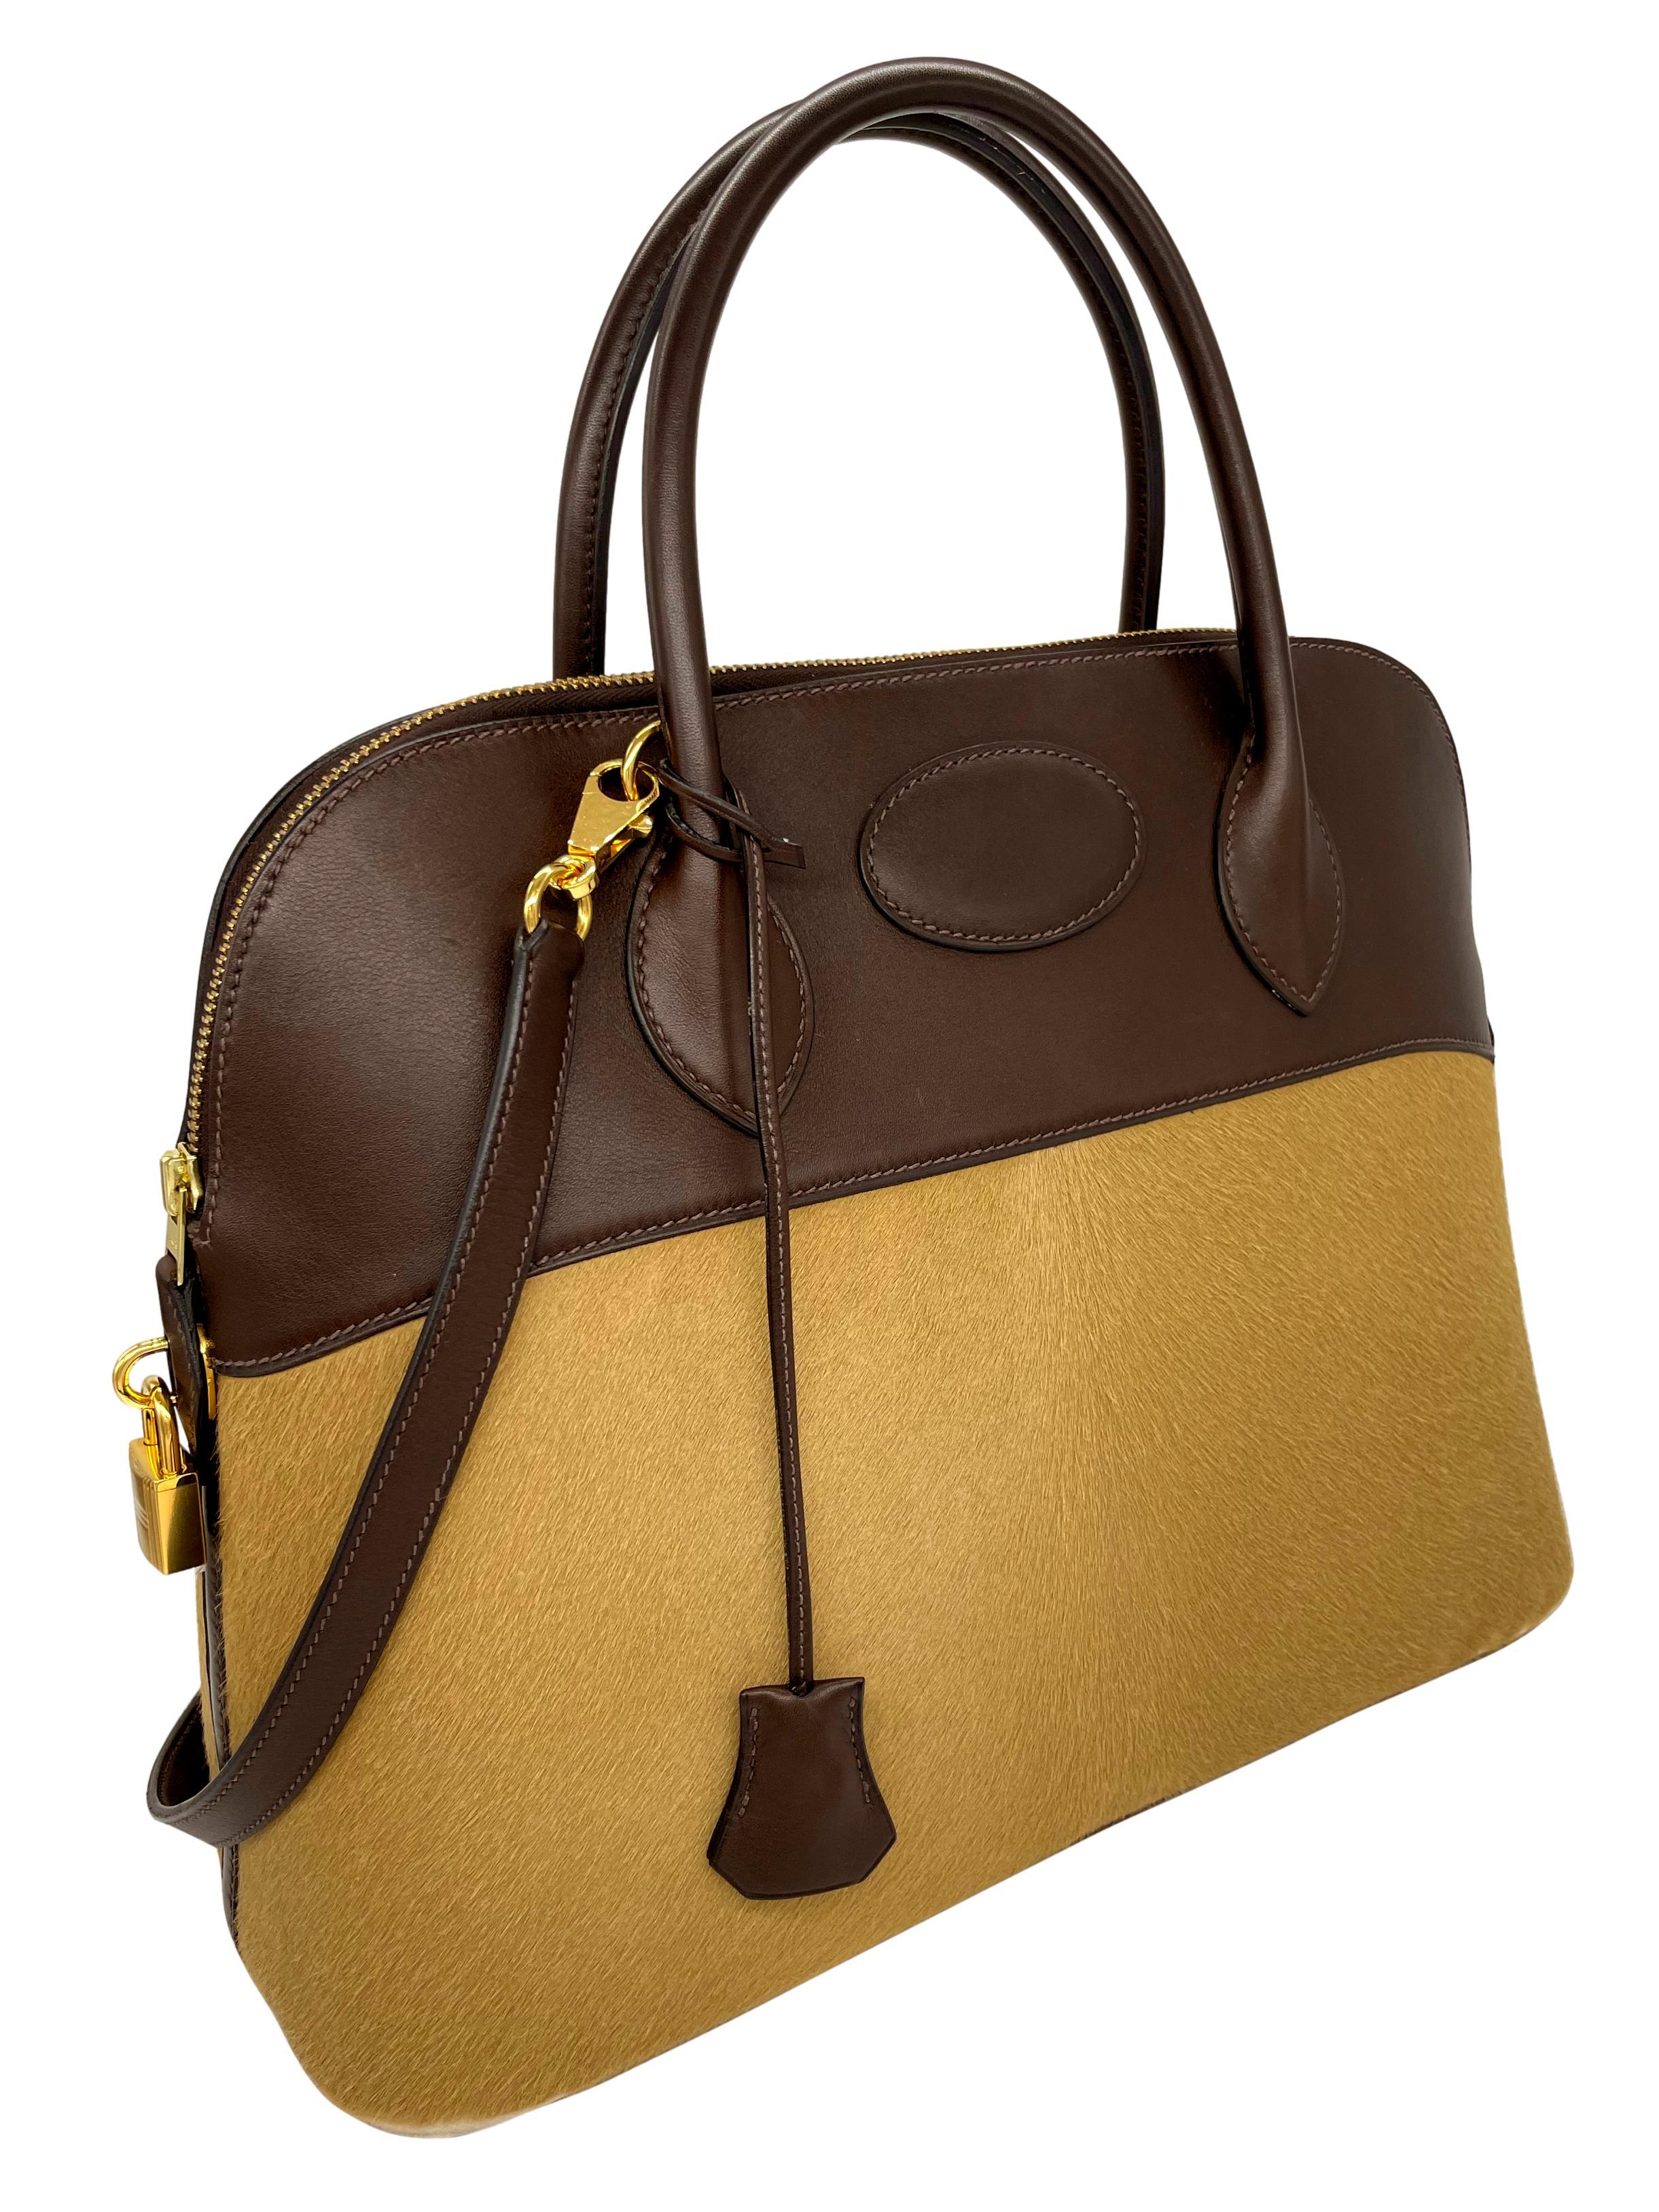 Hermés Limited Edition Ebene Evercalf & Troika Ponyhair Bolide Bag 35cm with Gold Hardware, 2007. Originally introduced in the Early 20th Century, the 